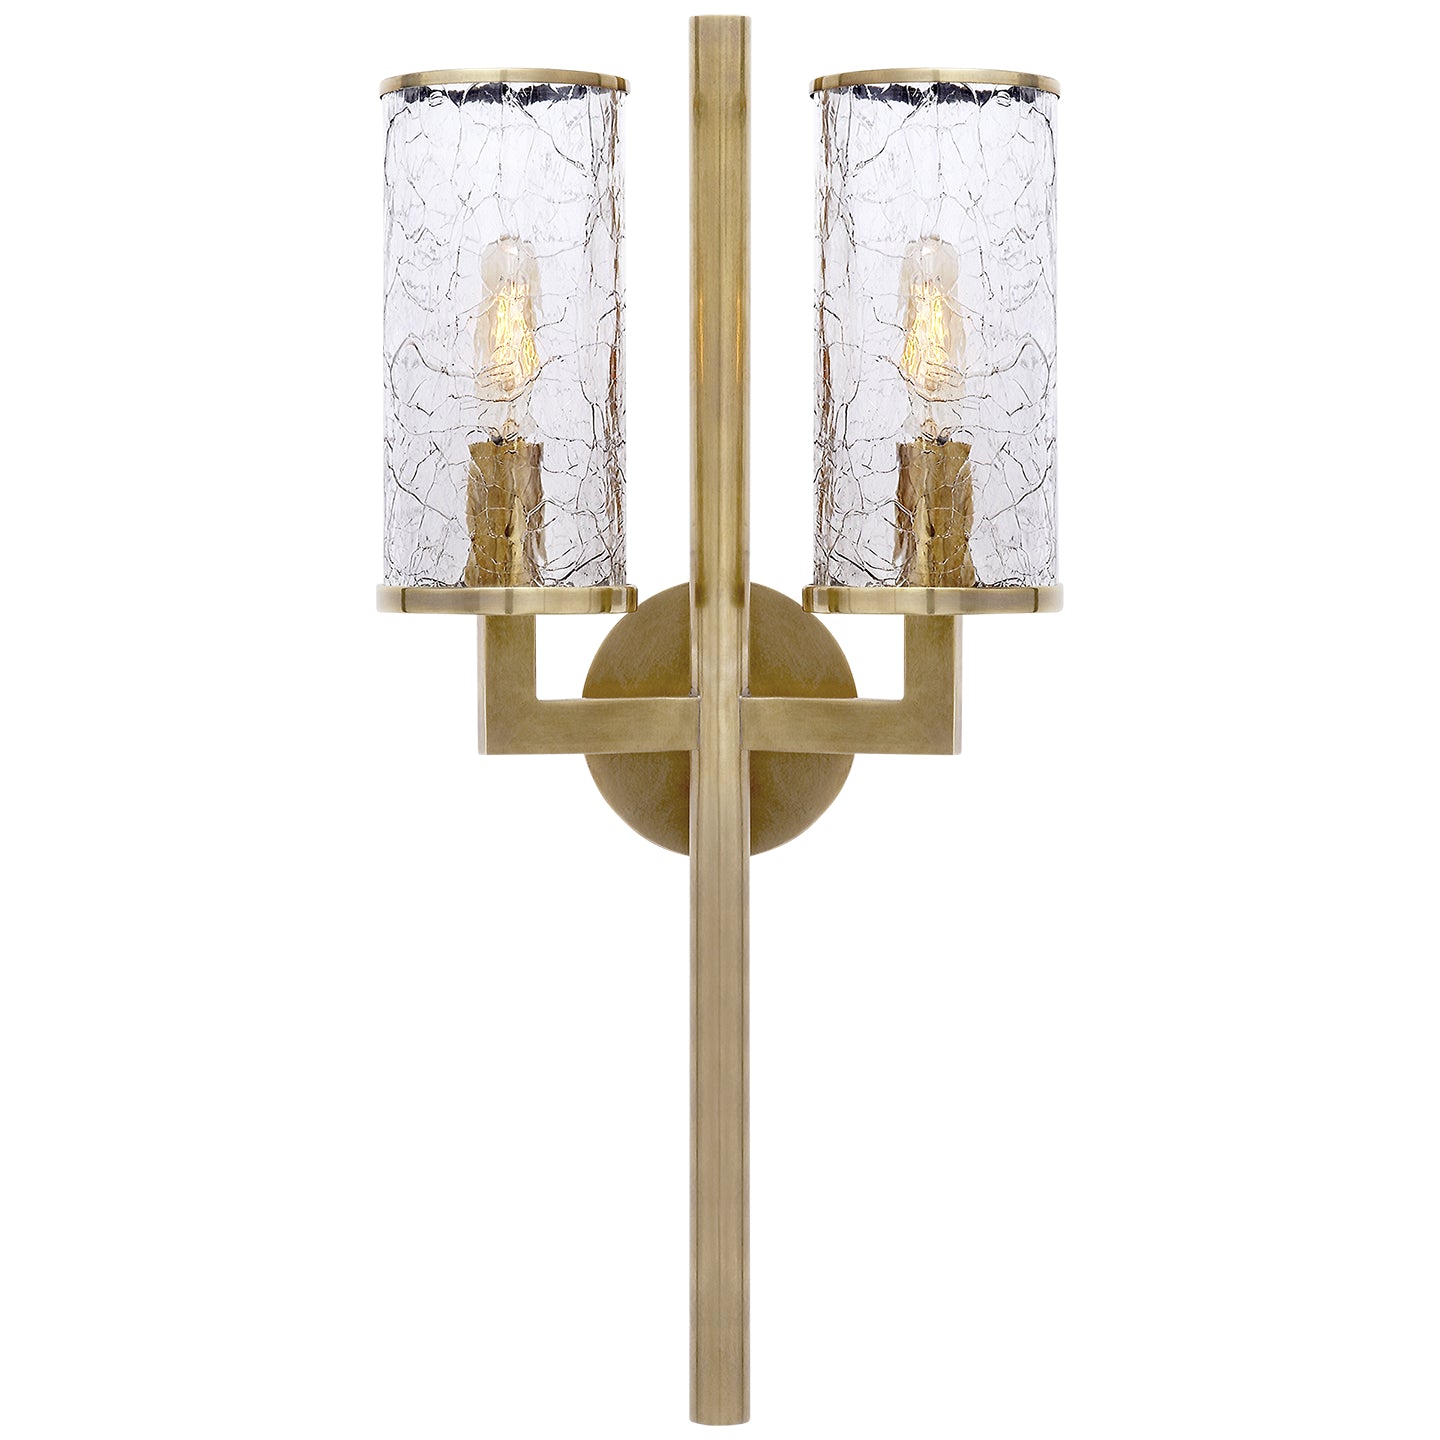 Visual Comfort Signature - KW 2201AB-CRG - Two Light Wall Sconce - Liaison - Antique-Burnished Brass